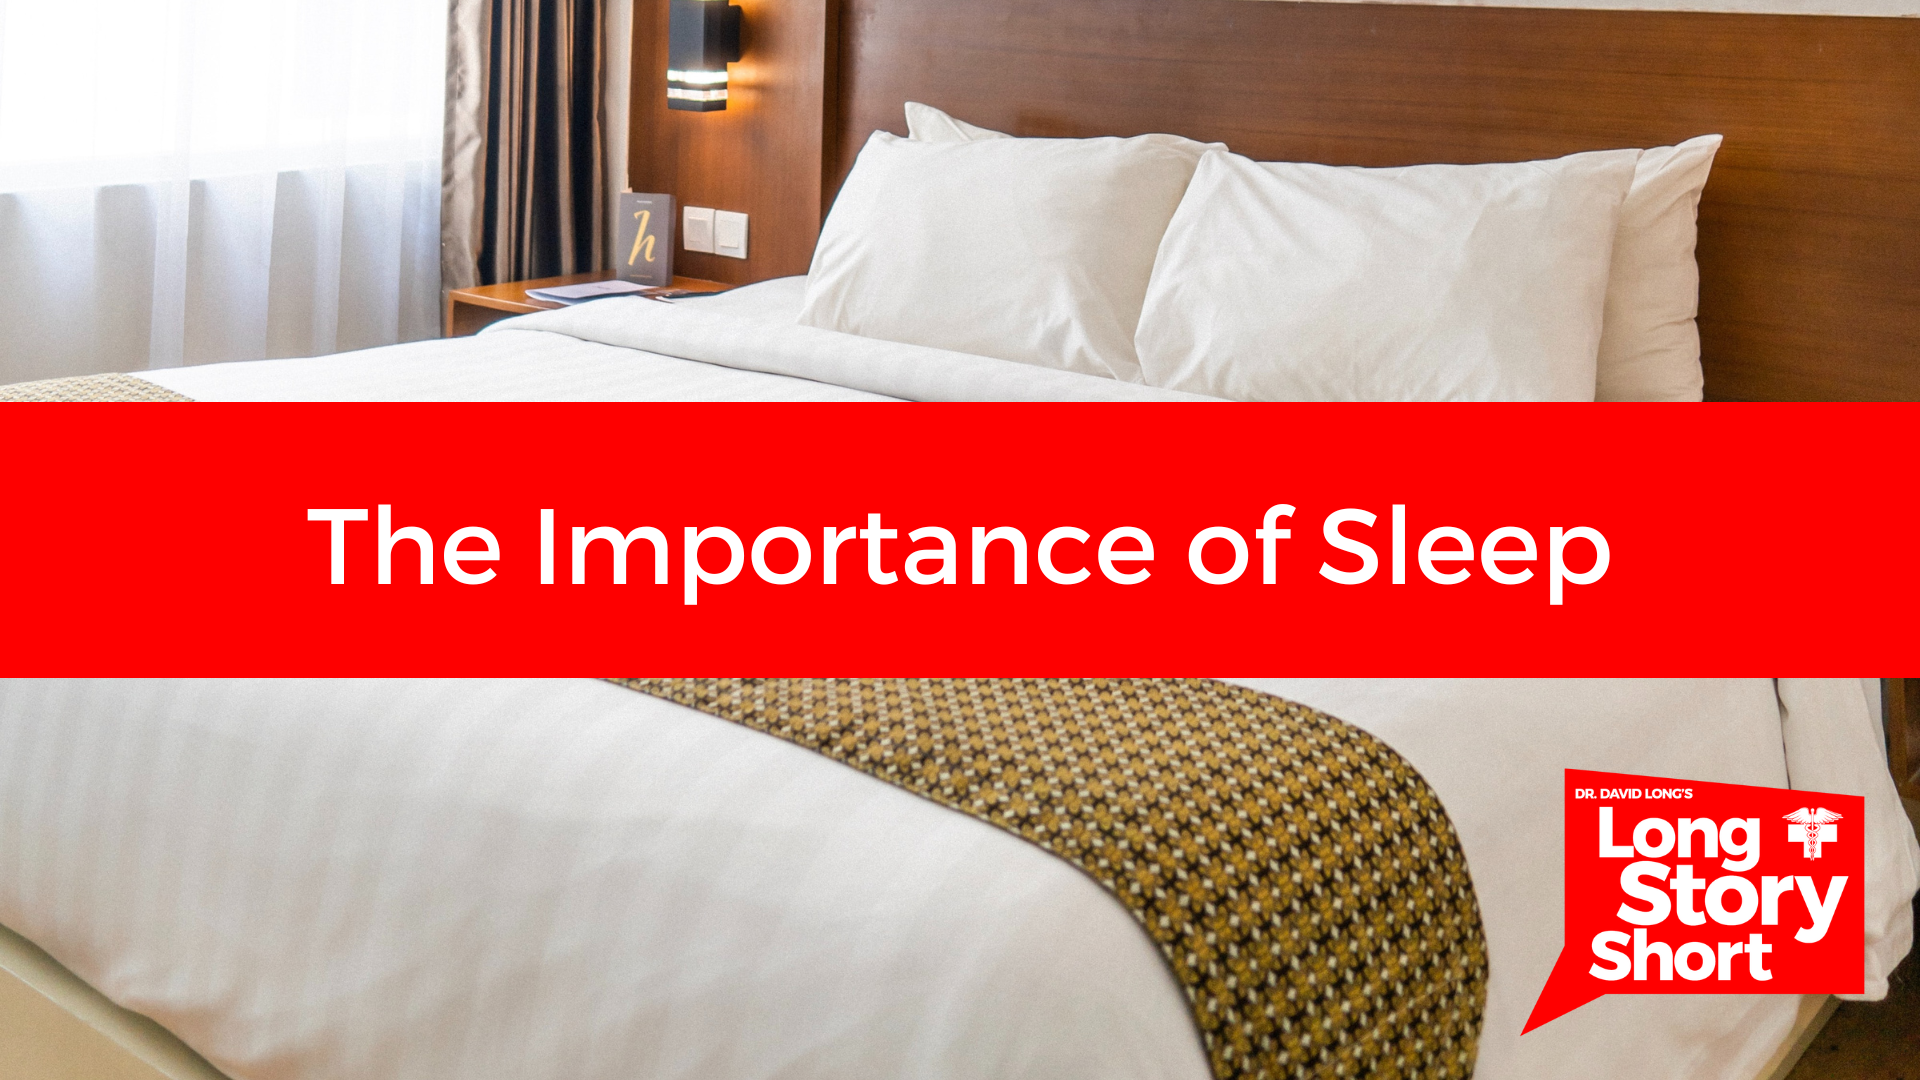 You are currently viewing The Importance of Sleep – Dr. David Long